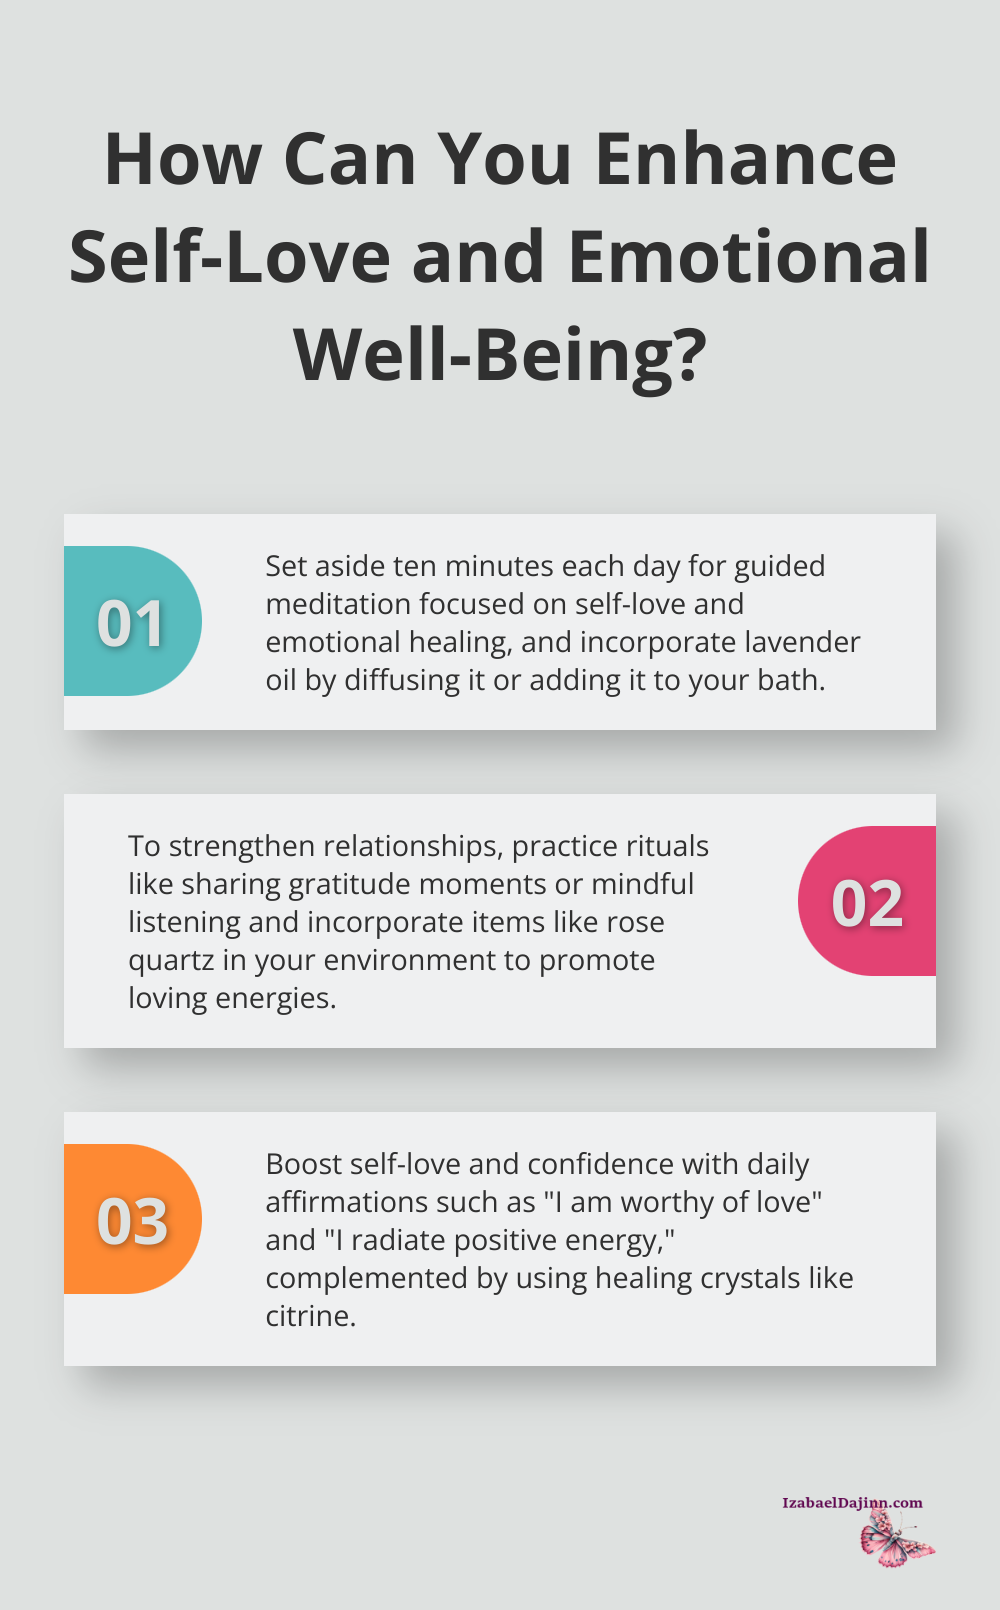 Fact - How Can You Enhance Self-Love and Emotional Well-Being?